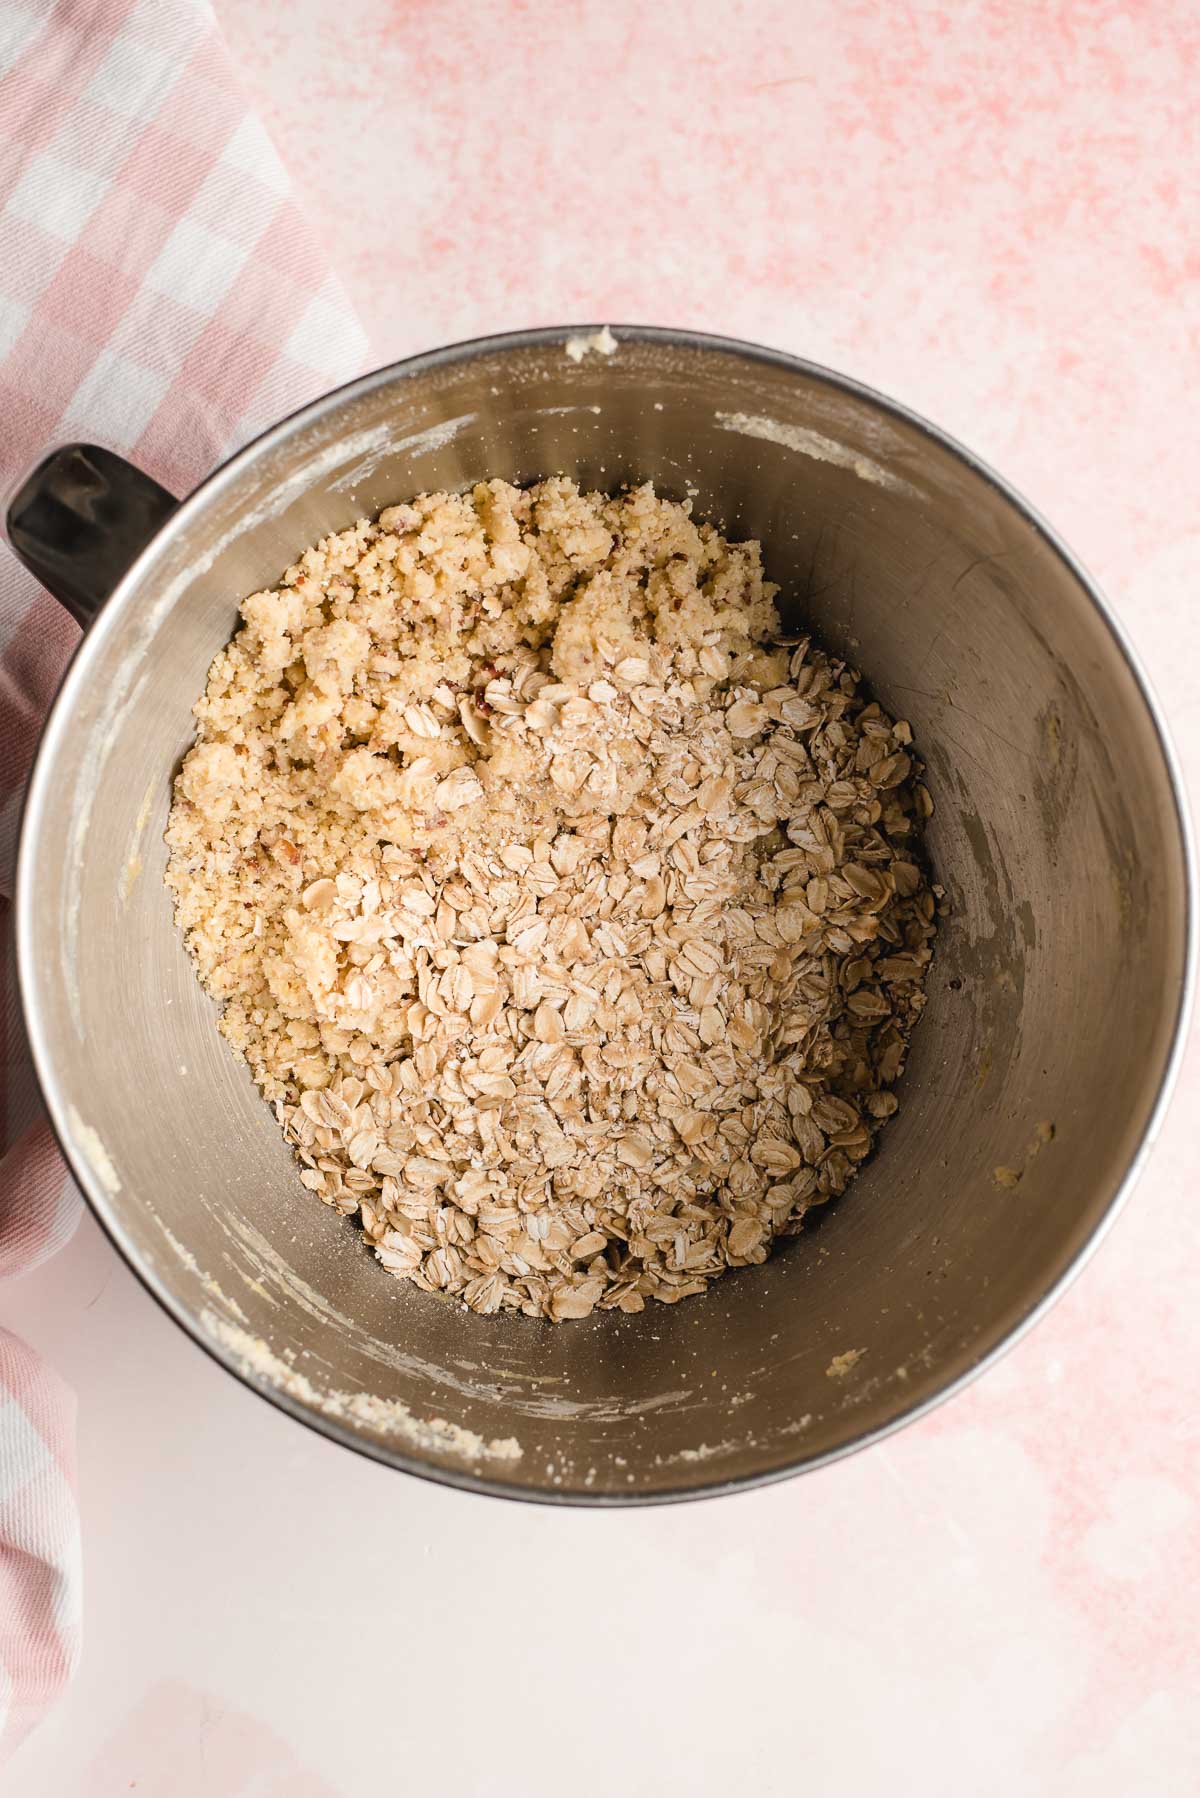 Oats and a butter, flour, sugar, and egg mixture shown in the bowl of an electric mixer.